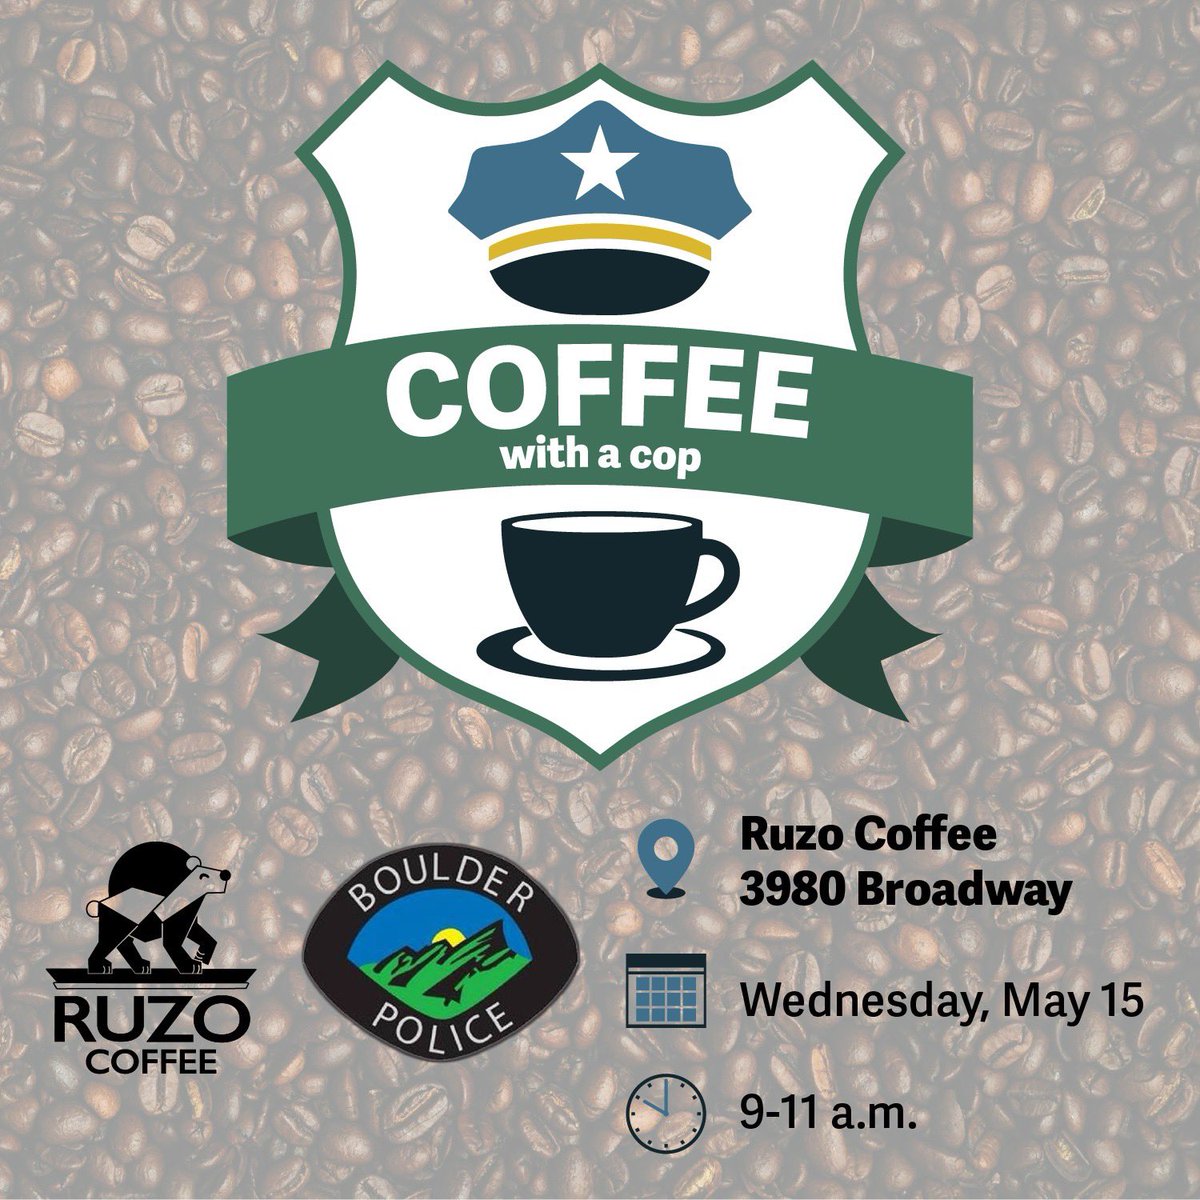 Want a delicious cup of coffee and have some public safety questions? Join us at Ruzo Coffee from 9-11am today! #boulder #bouldercolorado